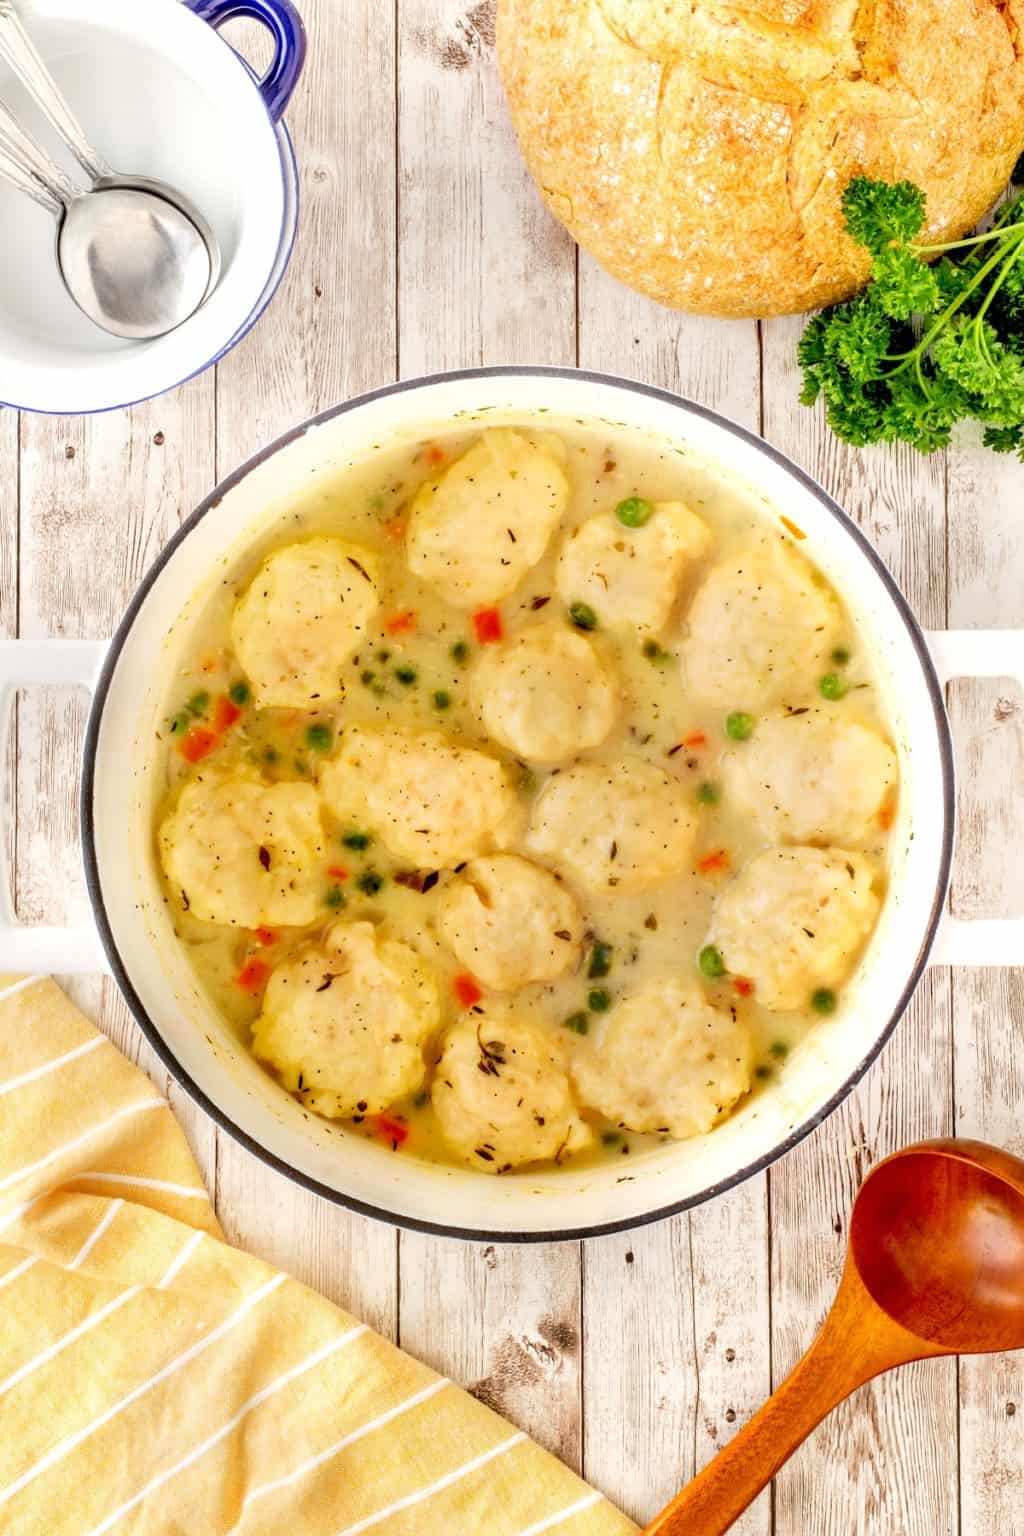 30 Minute Chicken and Dumplings Recipe - Noshing With the Nolands